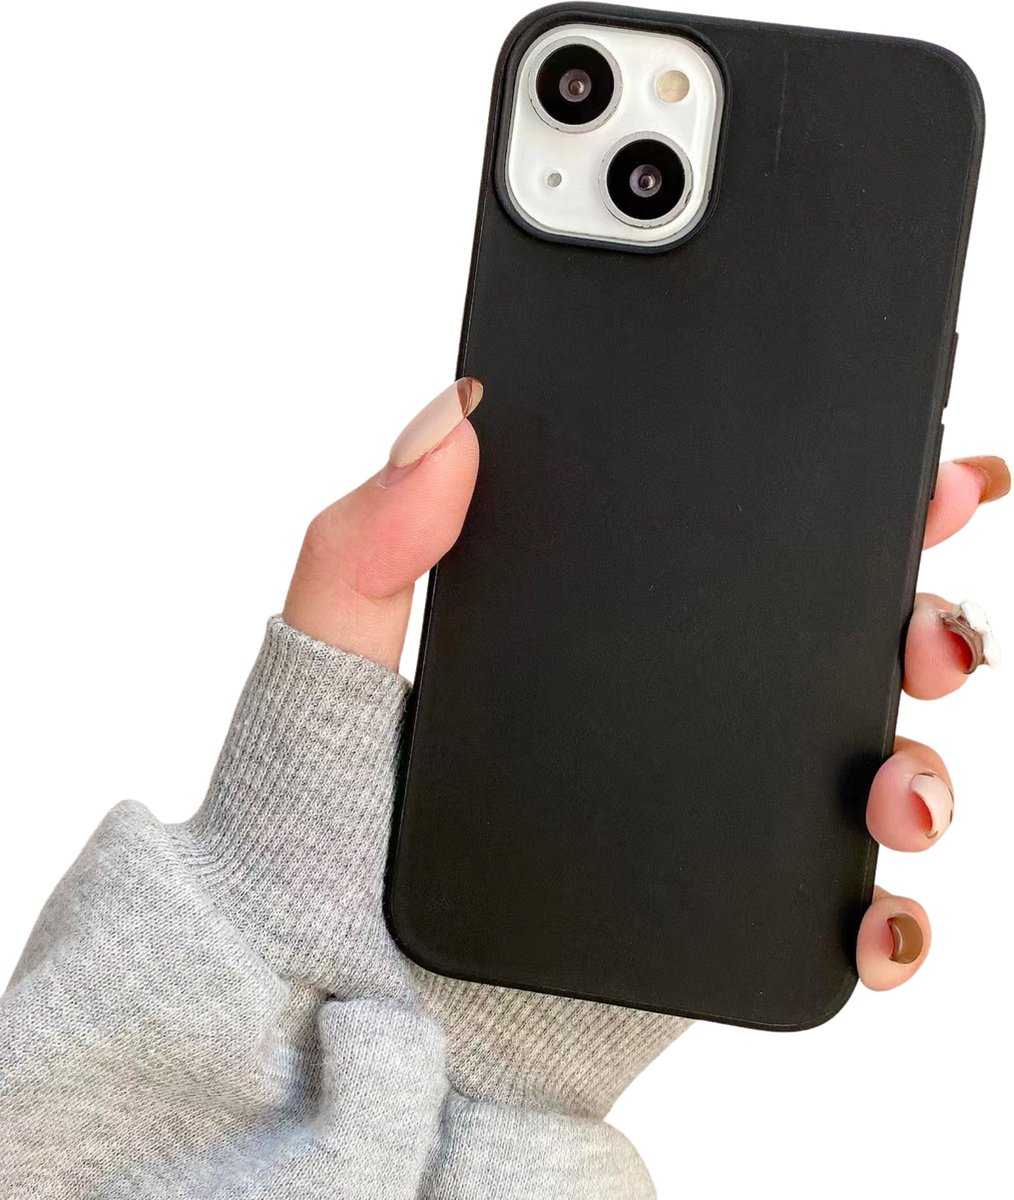 Apple iPhone 11 Soft Touch Hoesje - Zwart - Stevig Shockproof TPU Materiaal - Zachte Coating - Siliconen Feel Case - Back Cover